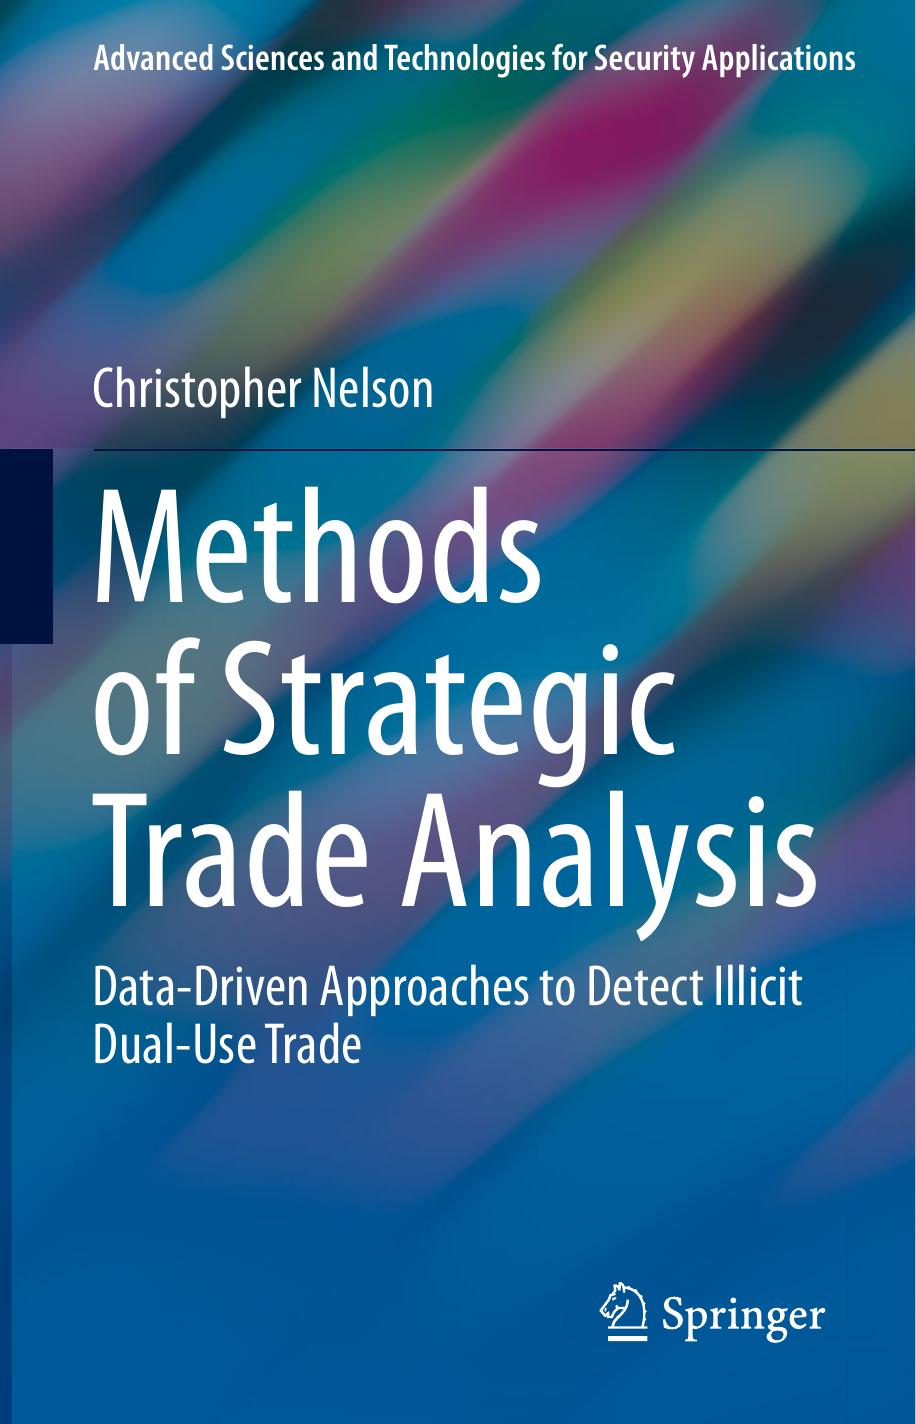 Methods of Strategic Trade Analysis: Data-Driven Approaches to Detect Illicit Dual-Use Trade by Christopher Nelson